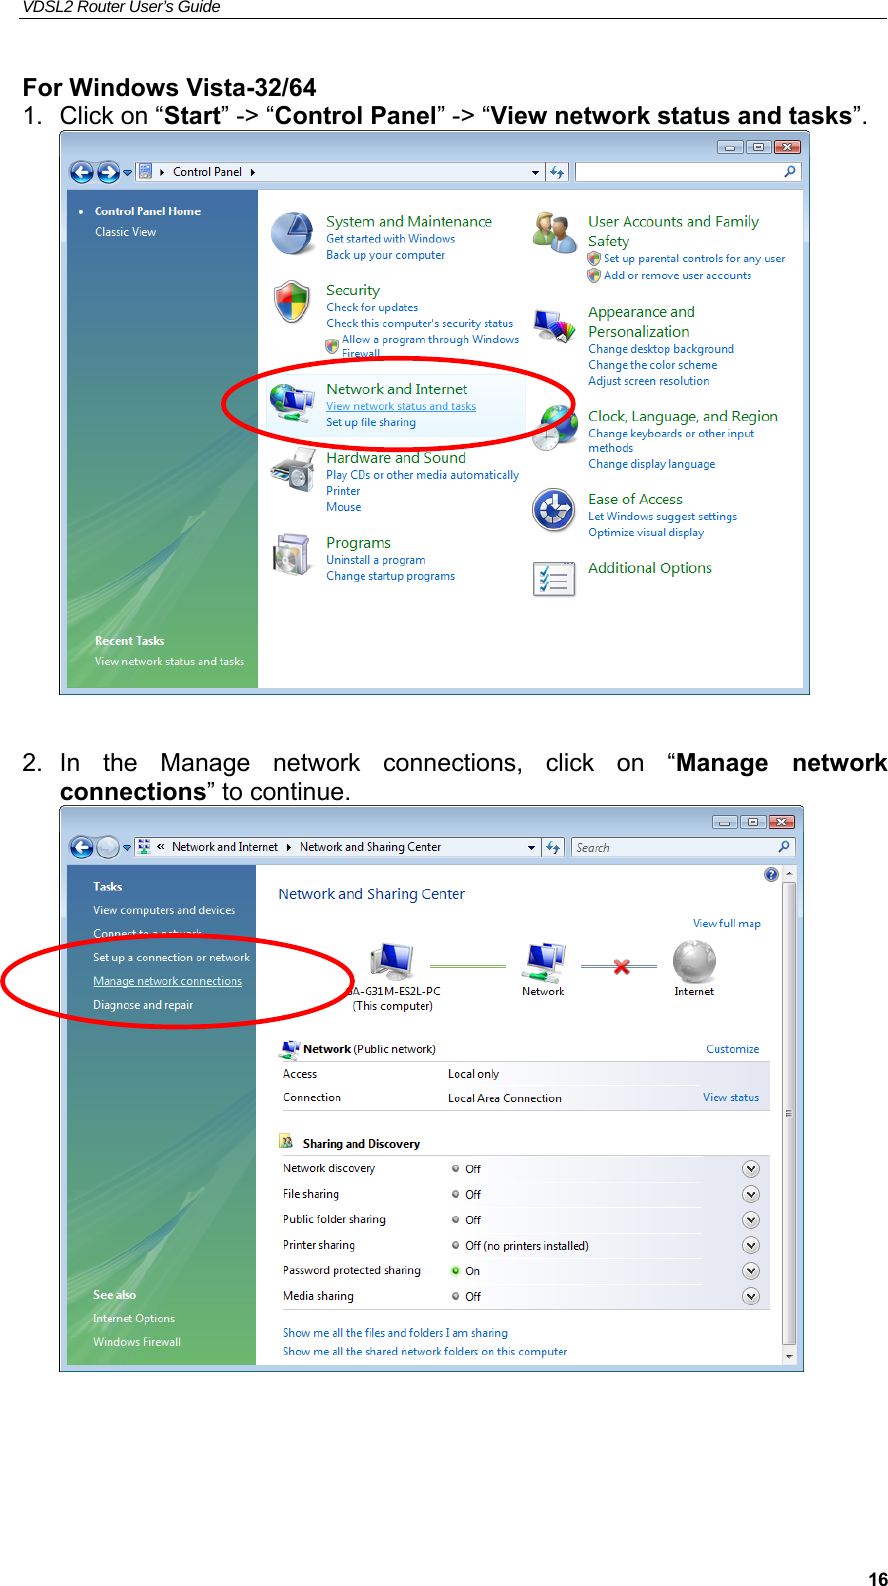 VDSL2 Router User’s Guide     16For Windows Vista-32/64 1.  Click on “Start” -&gt; “Control Panel” -&gt; “View network status and tasks”.   2.  In  the  Manage  network  connections,  click  on  “Manage  network connections” to continue.     